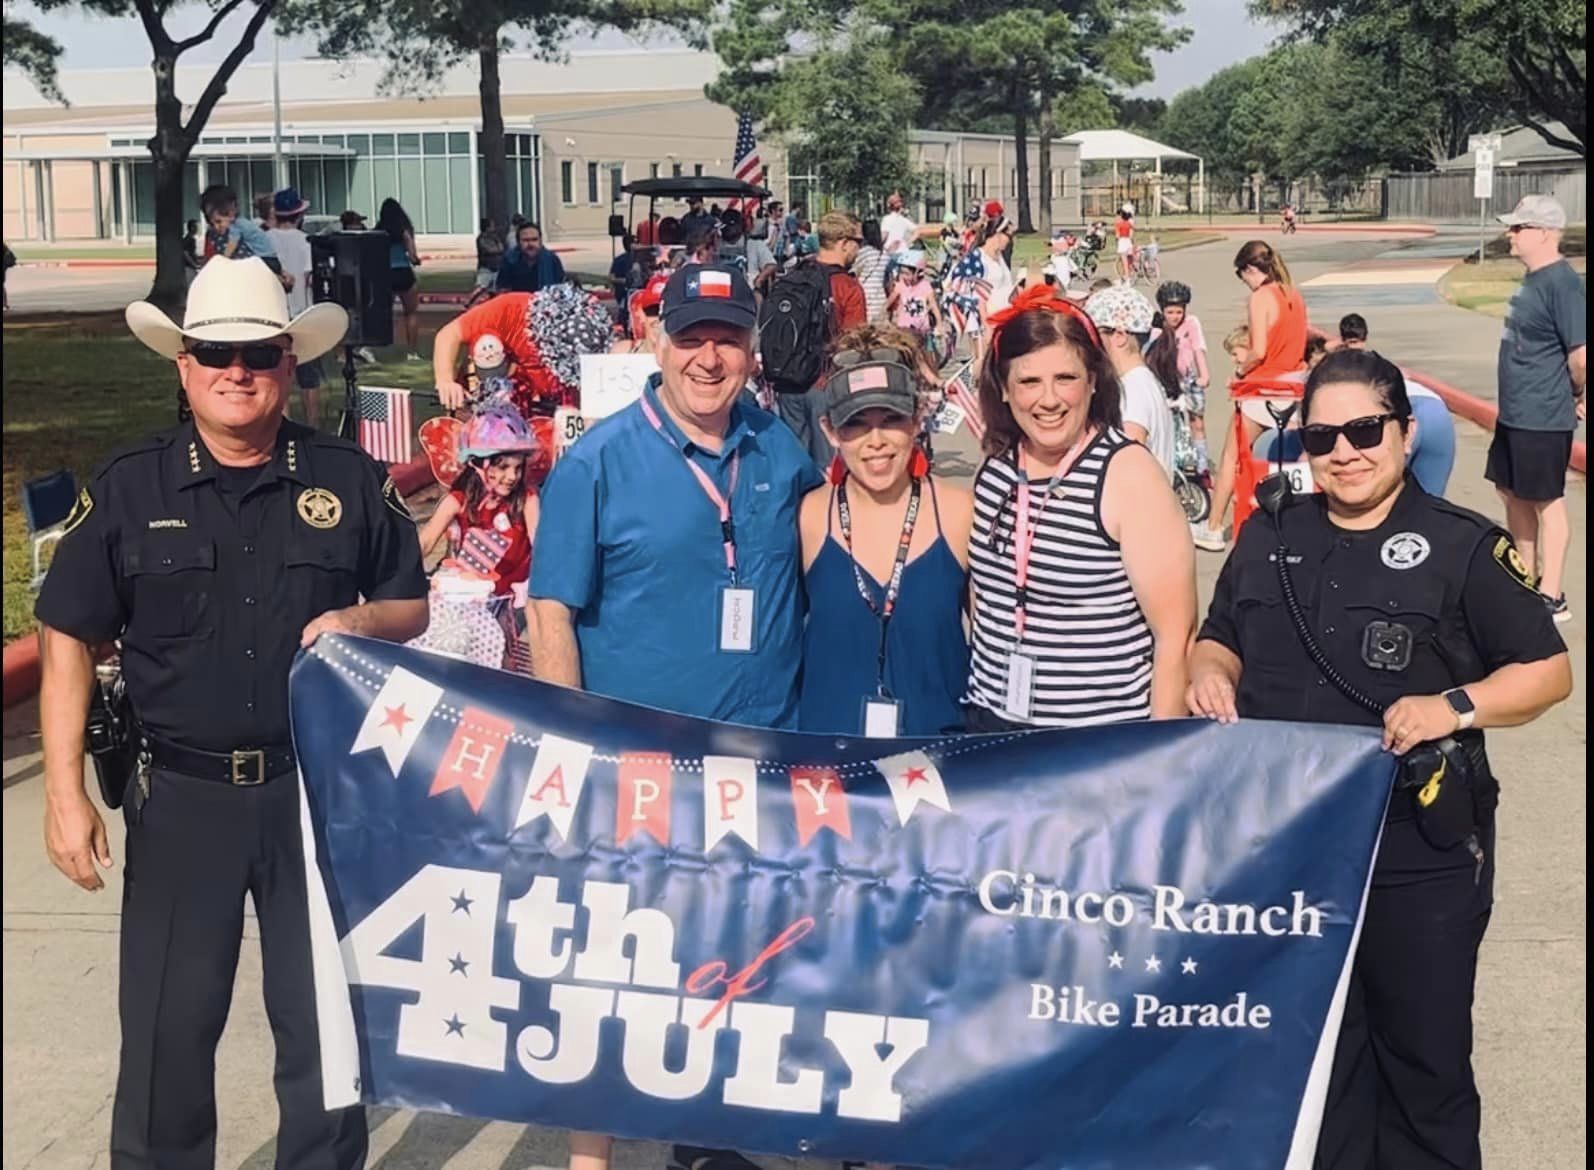 Cinco Ranch 4th of July Bike Parade Was A Success!